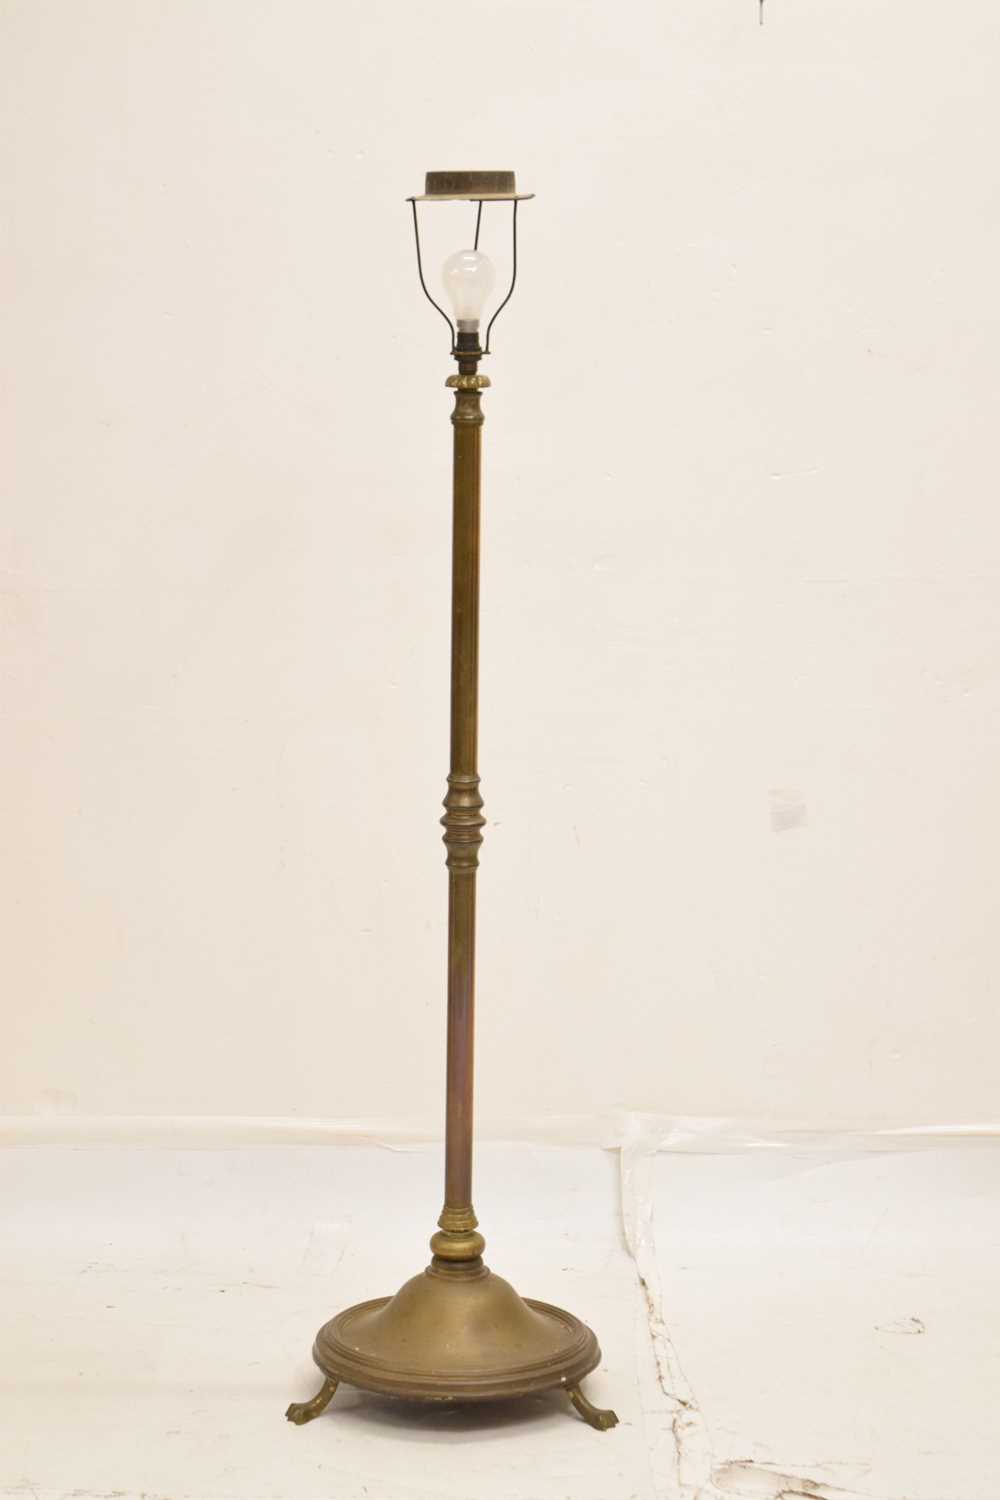 Early 20th century brass standard lamp - Image 2 of 5